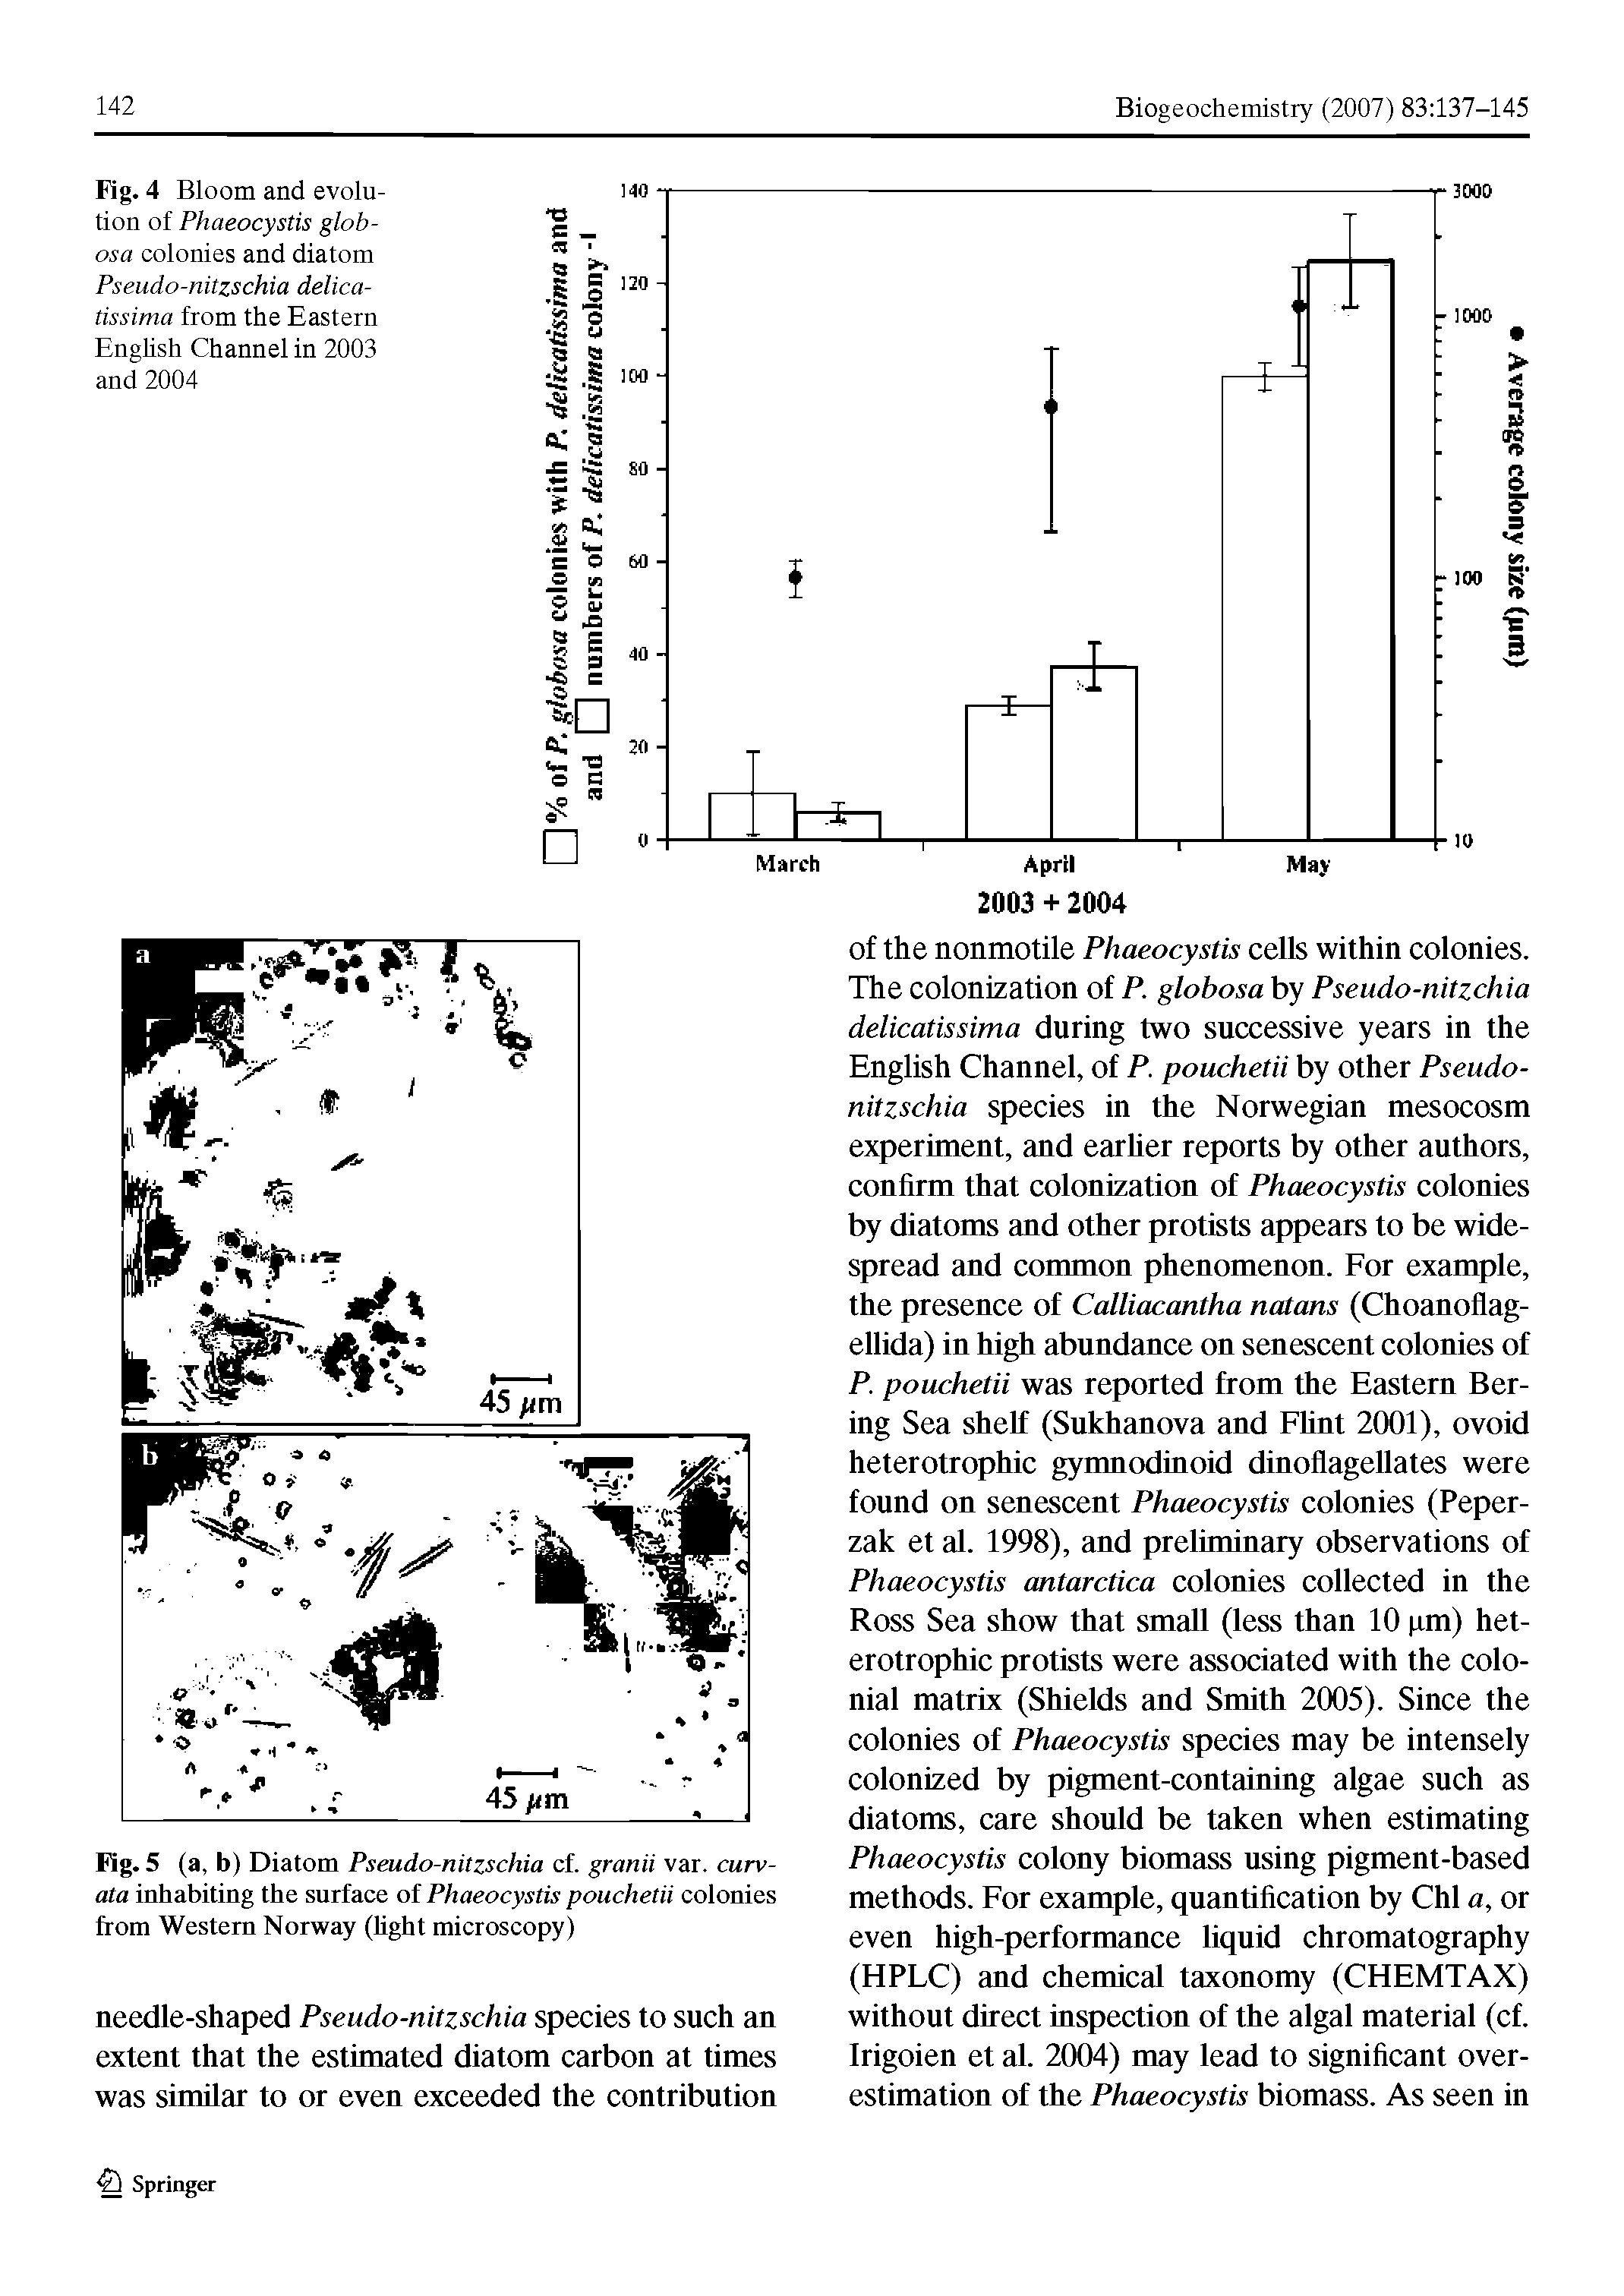 Fig. 4 Bloom and evolution of Phaeocystis glob-osa colonies and diatom Pseudo-nitzschia delica-tissima from the Eastern English Channel in 2003 and 2004...